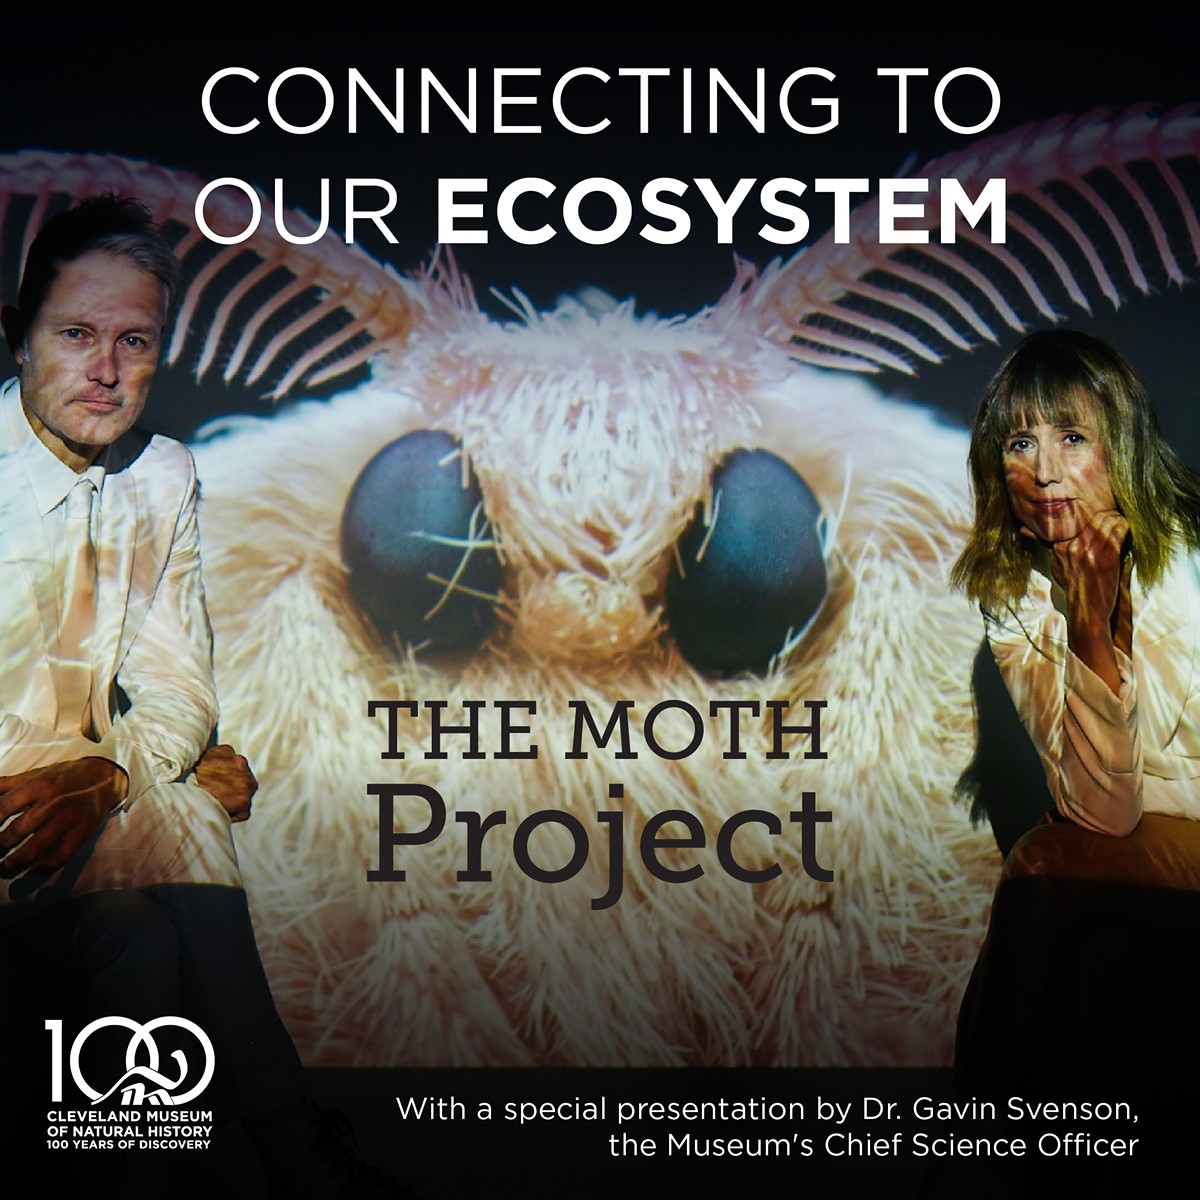 Connecting to Our Ecosystem: The Moth Project